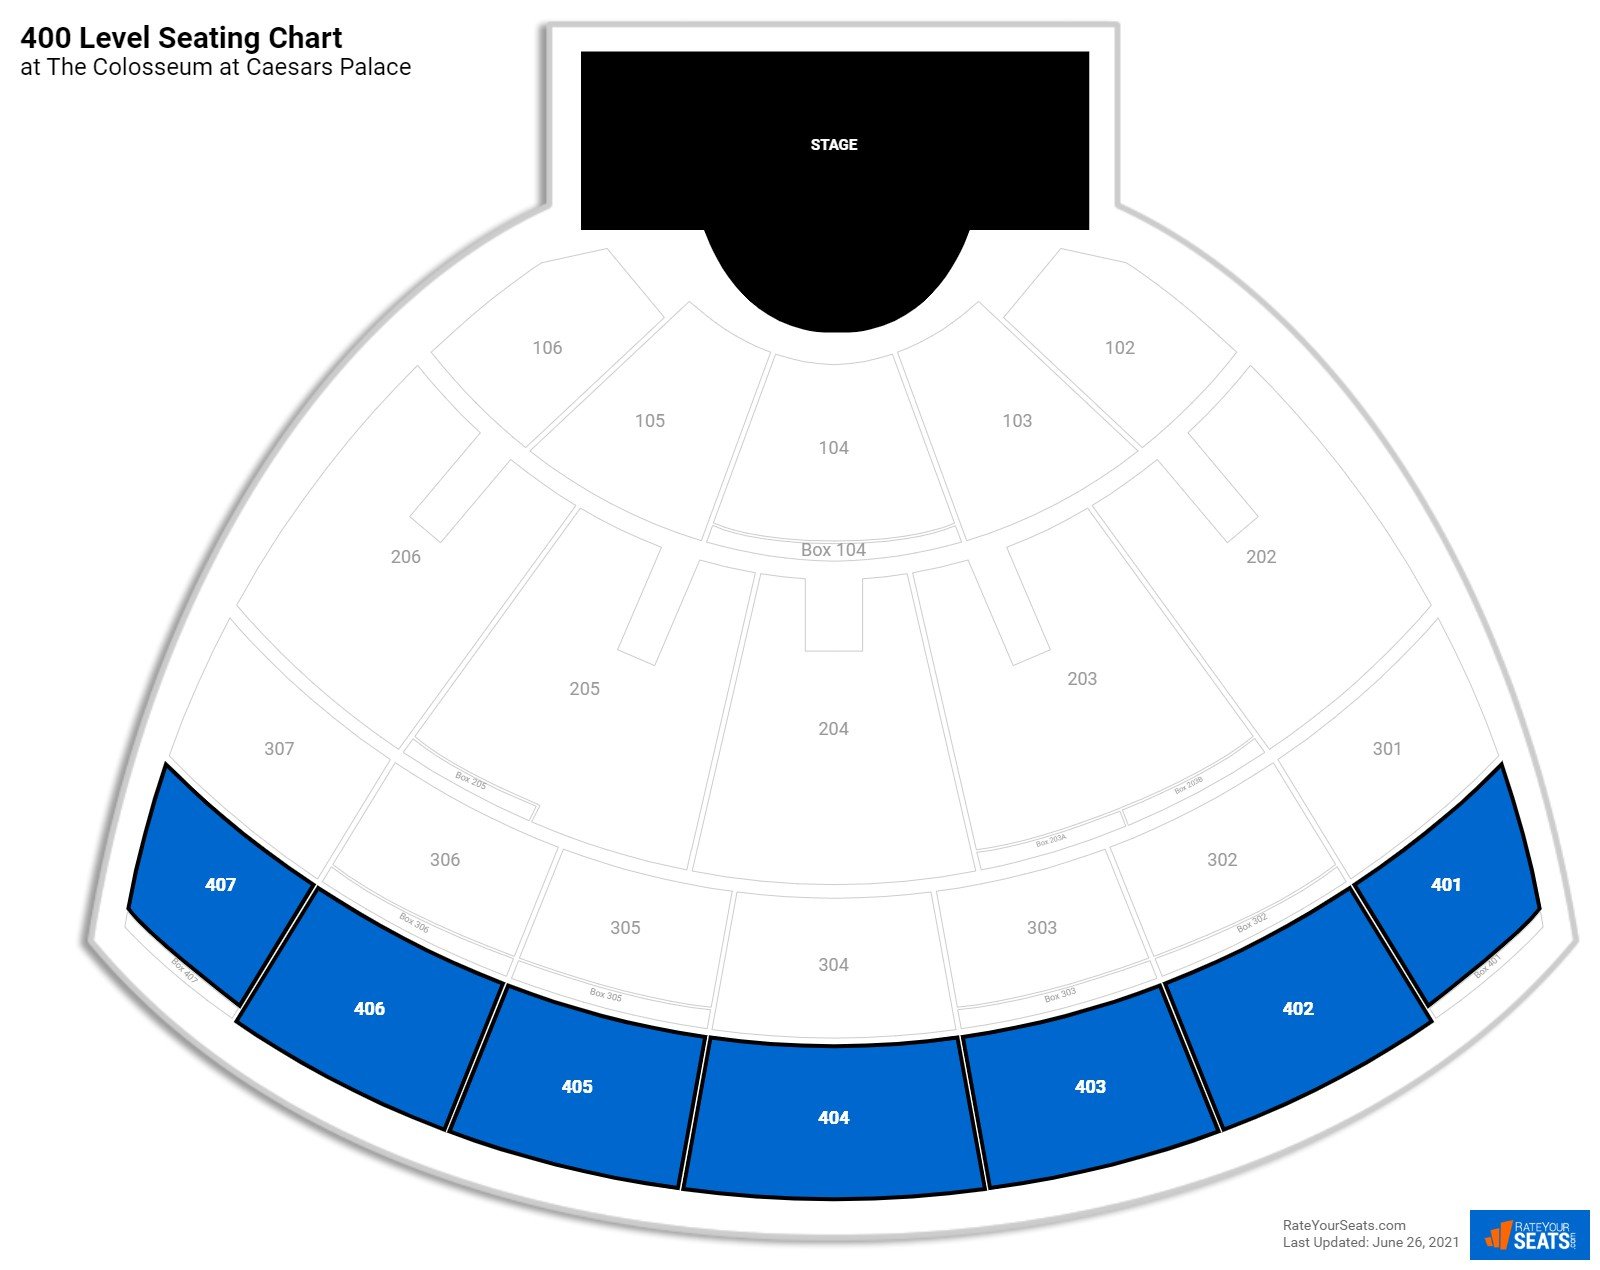 Concert 400 Level Seating Chart at The Colosseum at Caesars Palace